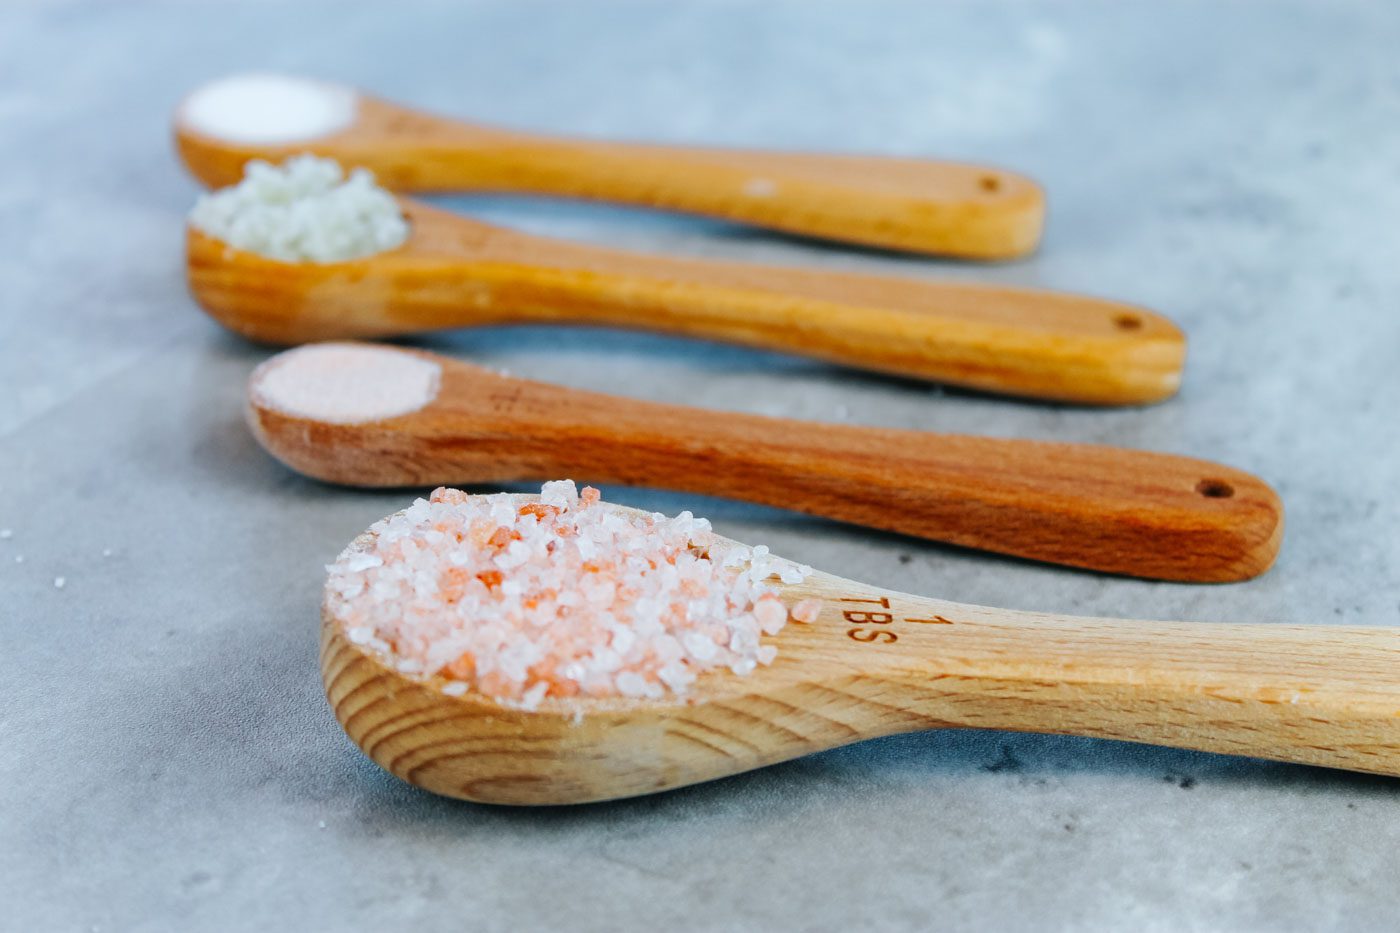 four measuring spoons full of different types of salts